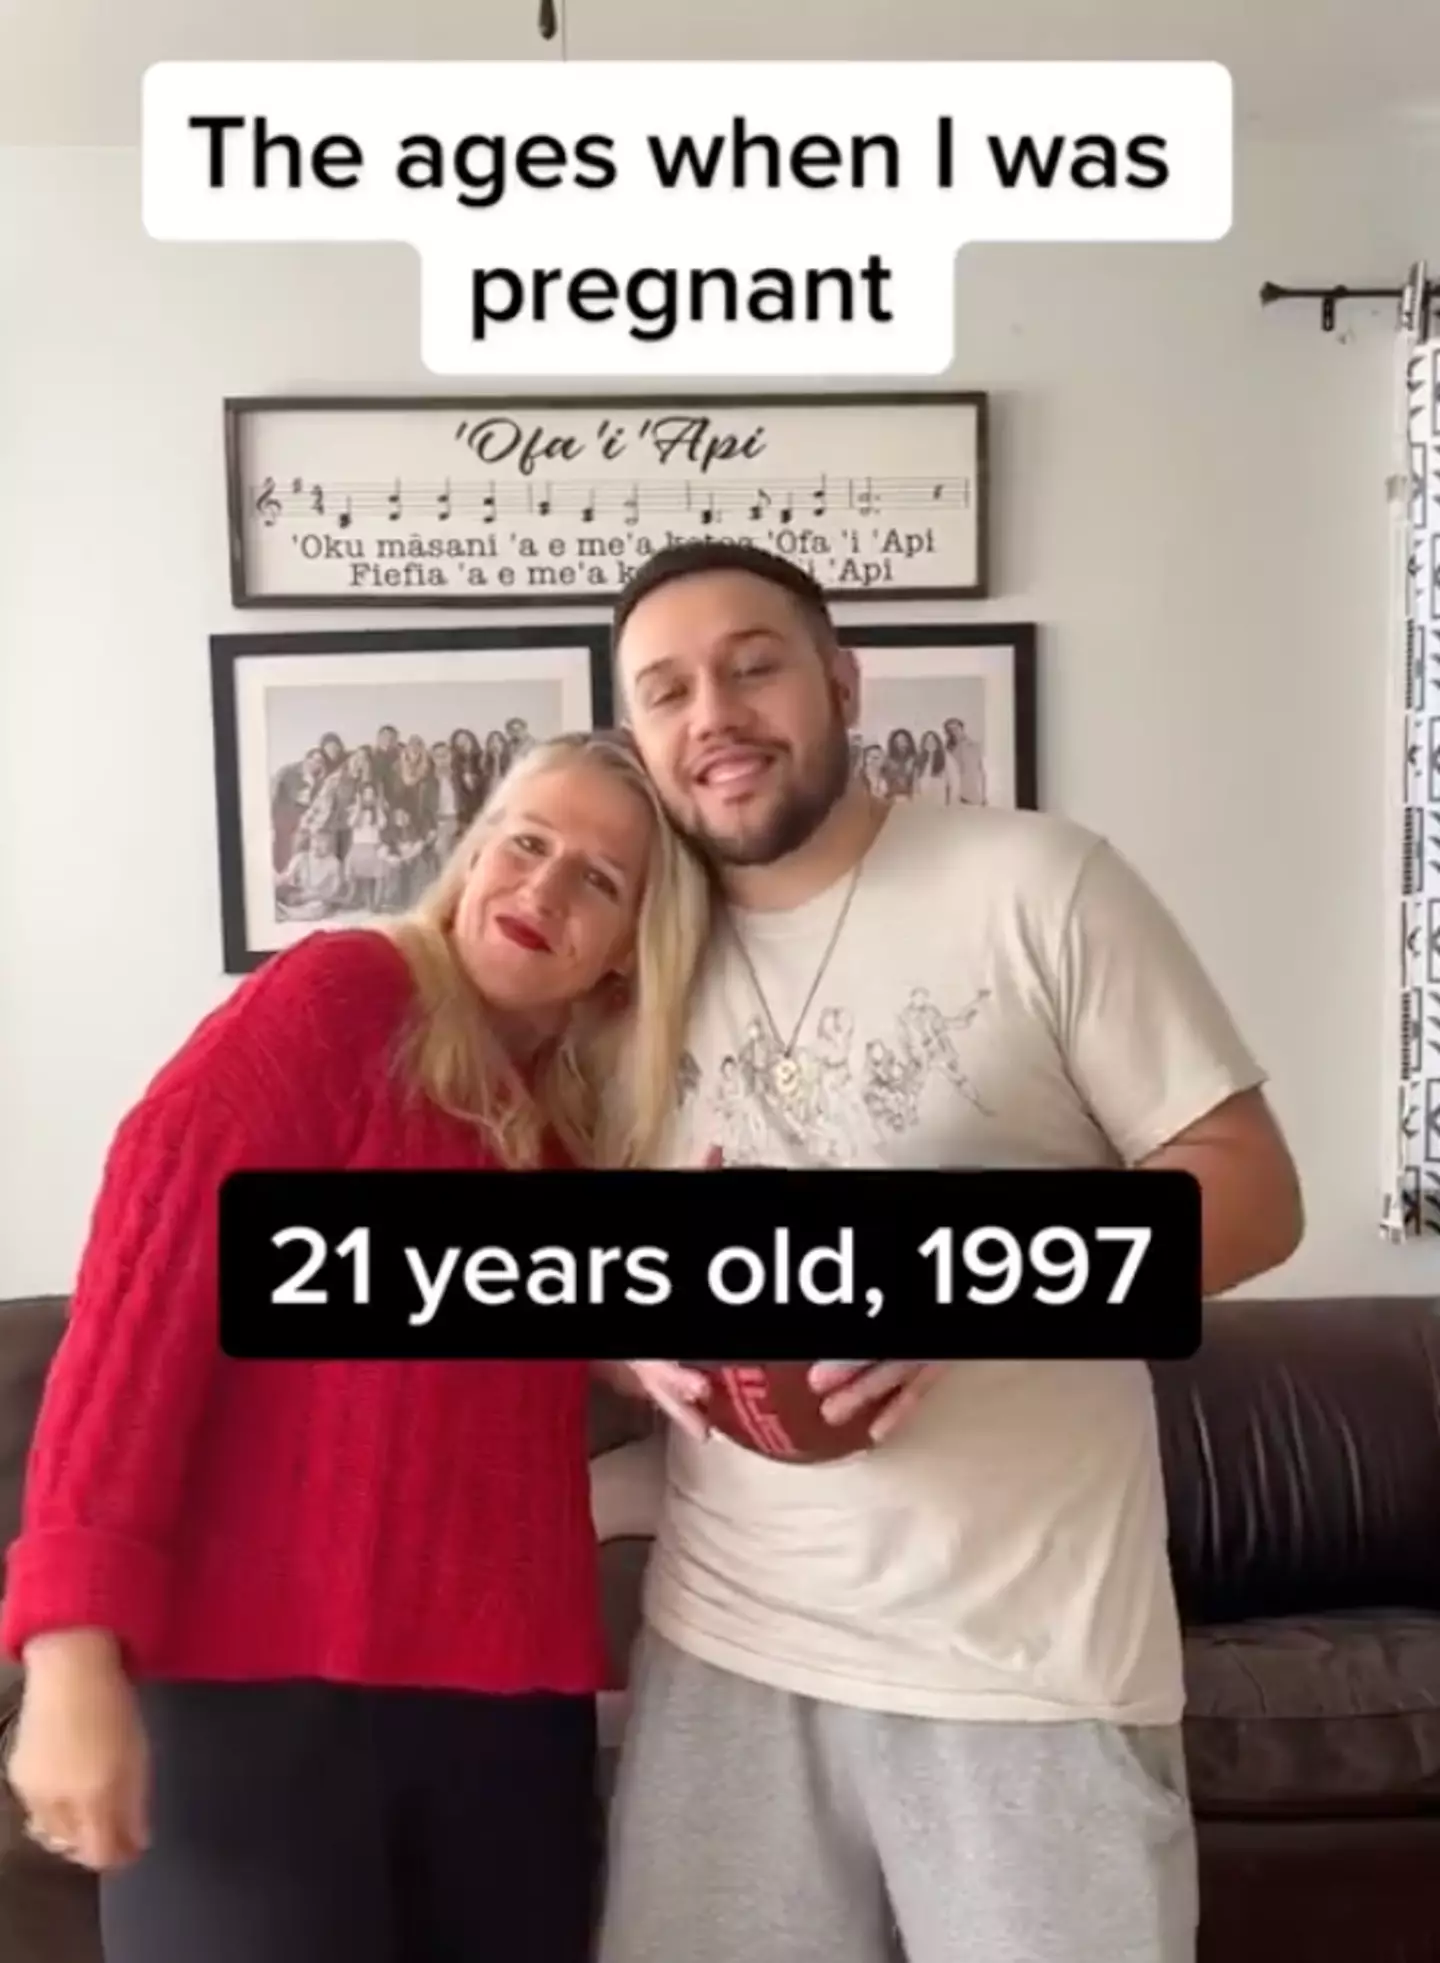 Sarah has been pregnant across 21 years of her life.